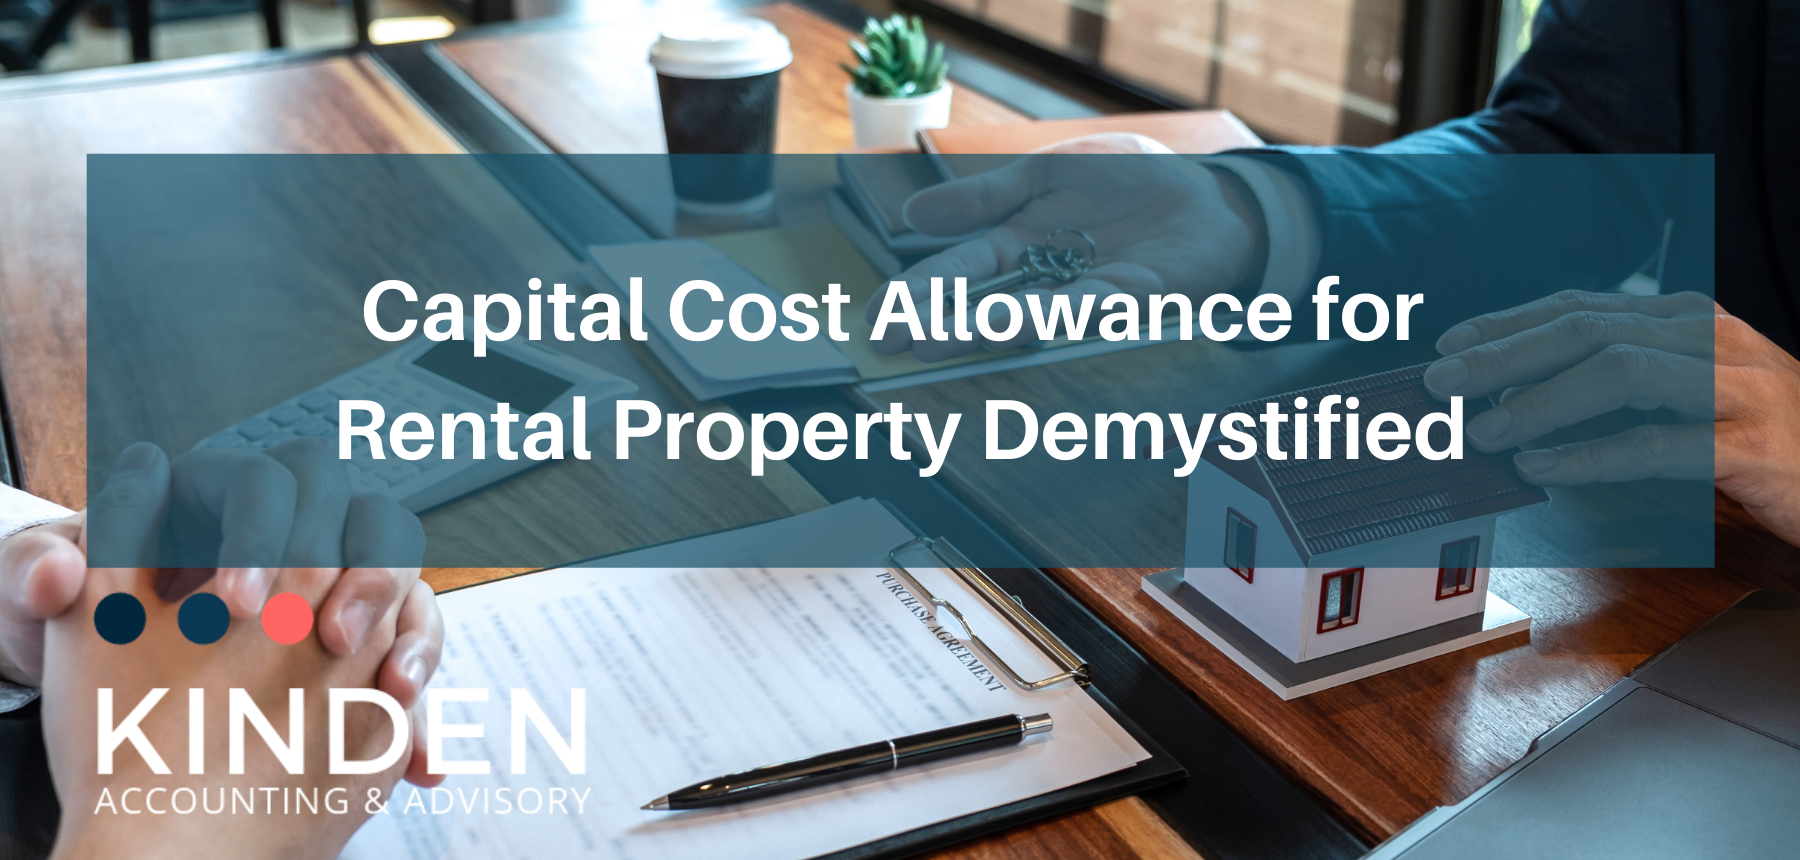 Capital Cost Allowance for Rental Property Demystified